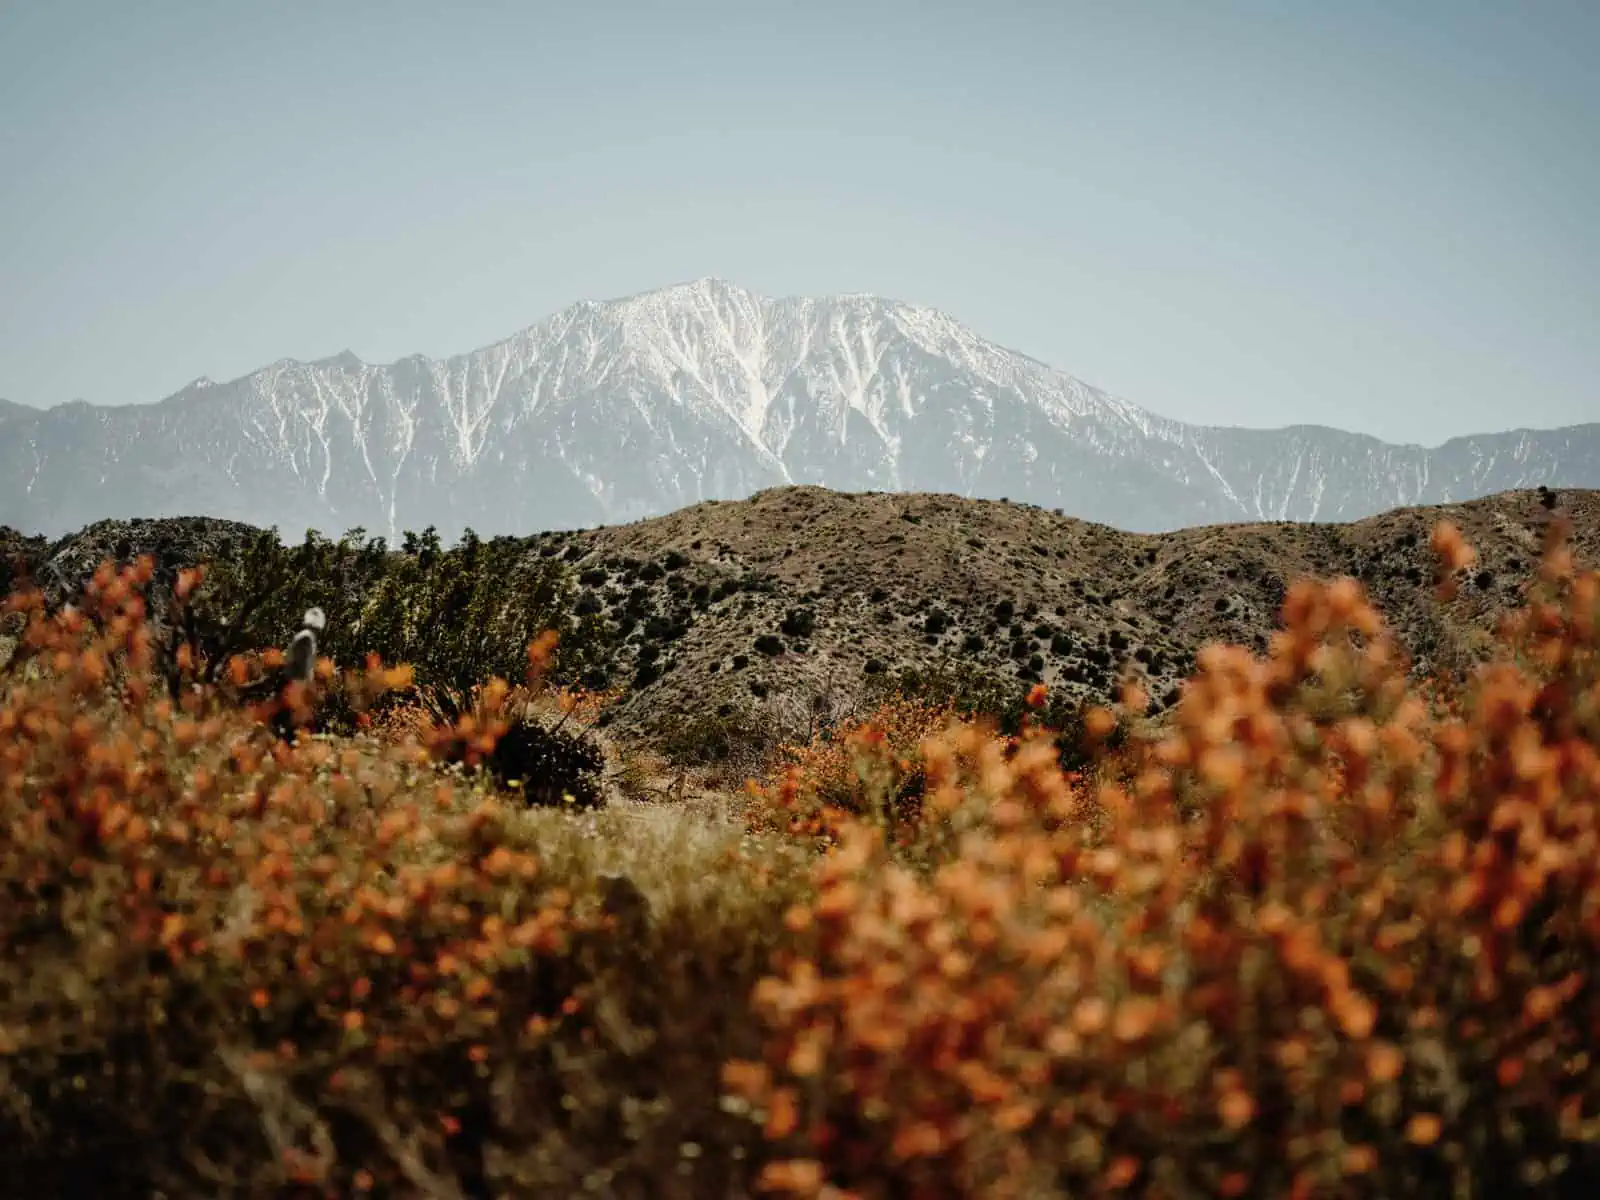 Morongo Valley, Greater Palm Springs. You start to find yourself looking for new angles and new ways you can see things, and becoming appreciative for a super bloom, creating images you didn’t really envisage happening where you were.